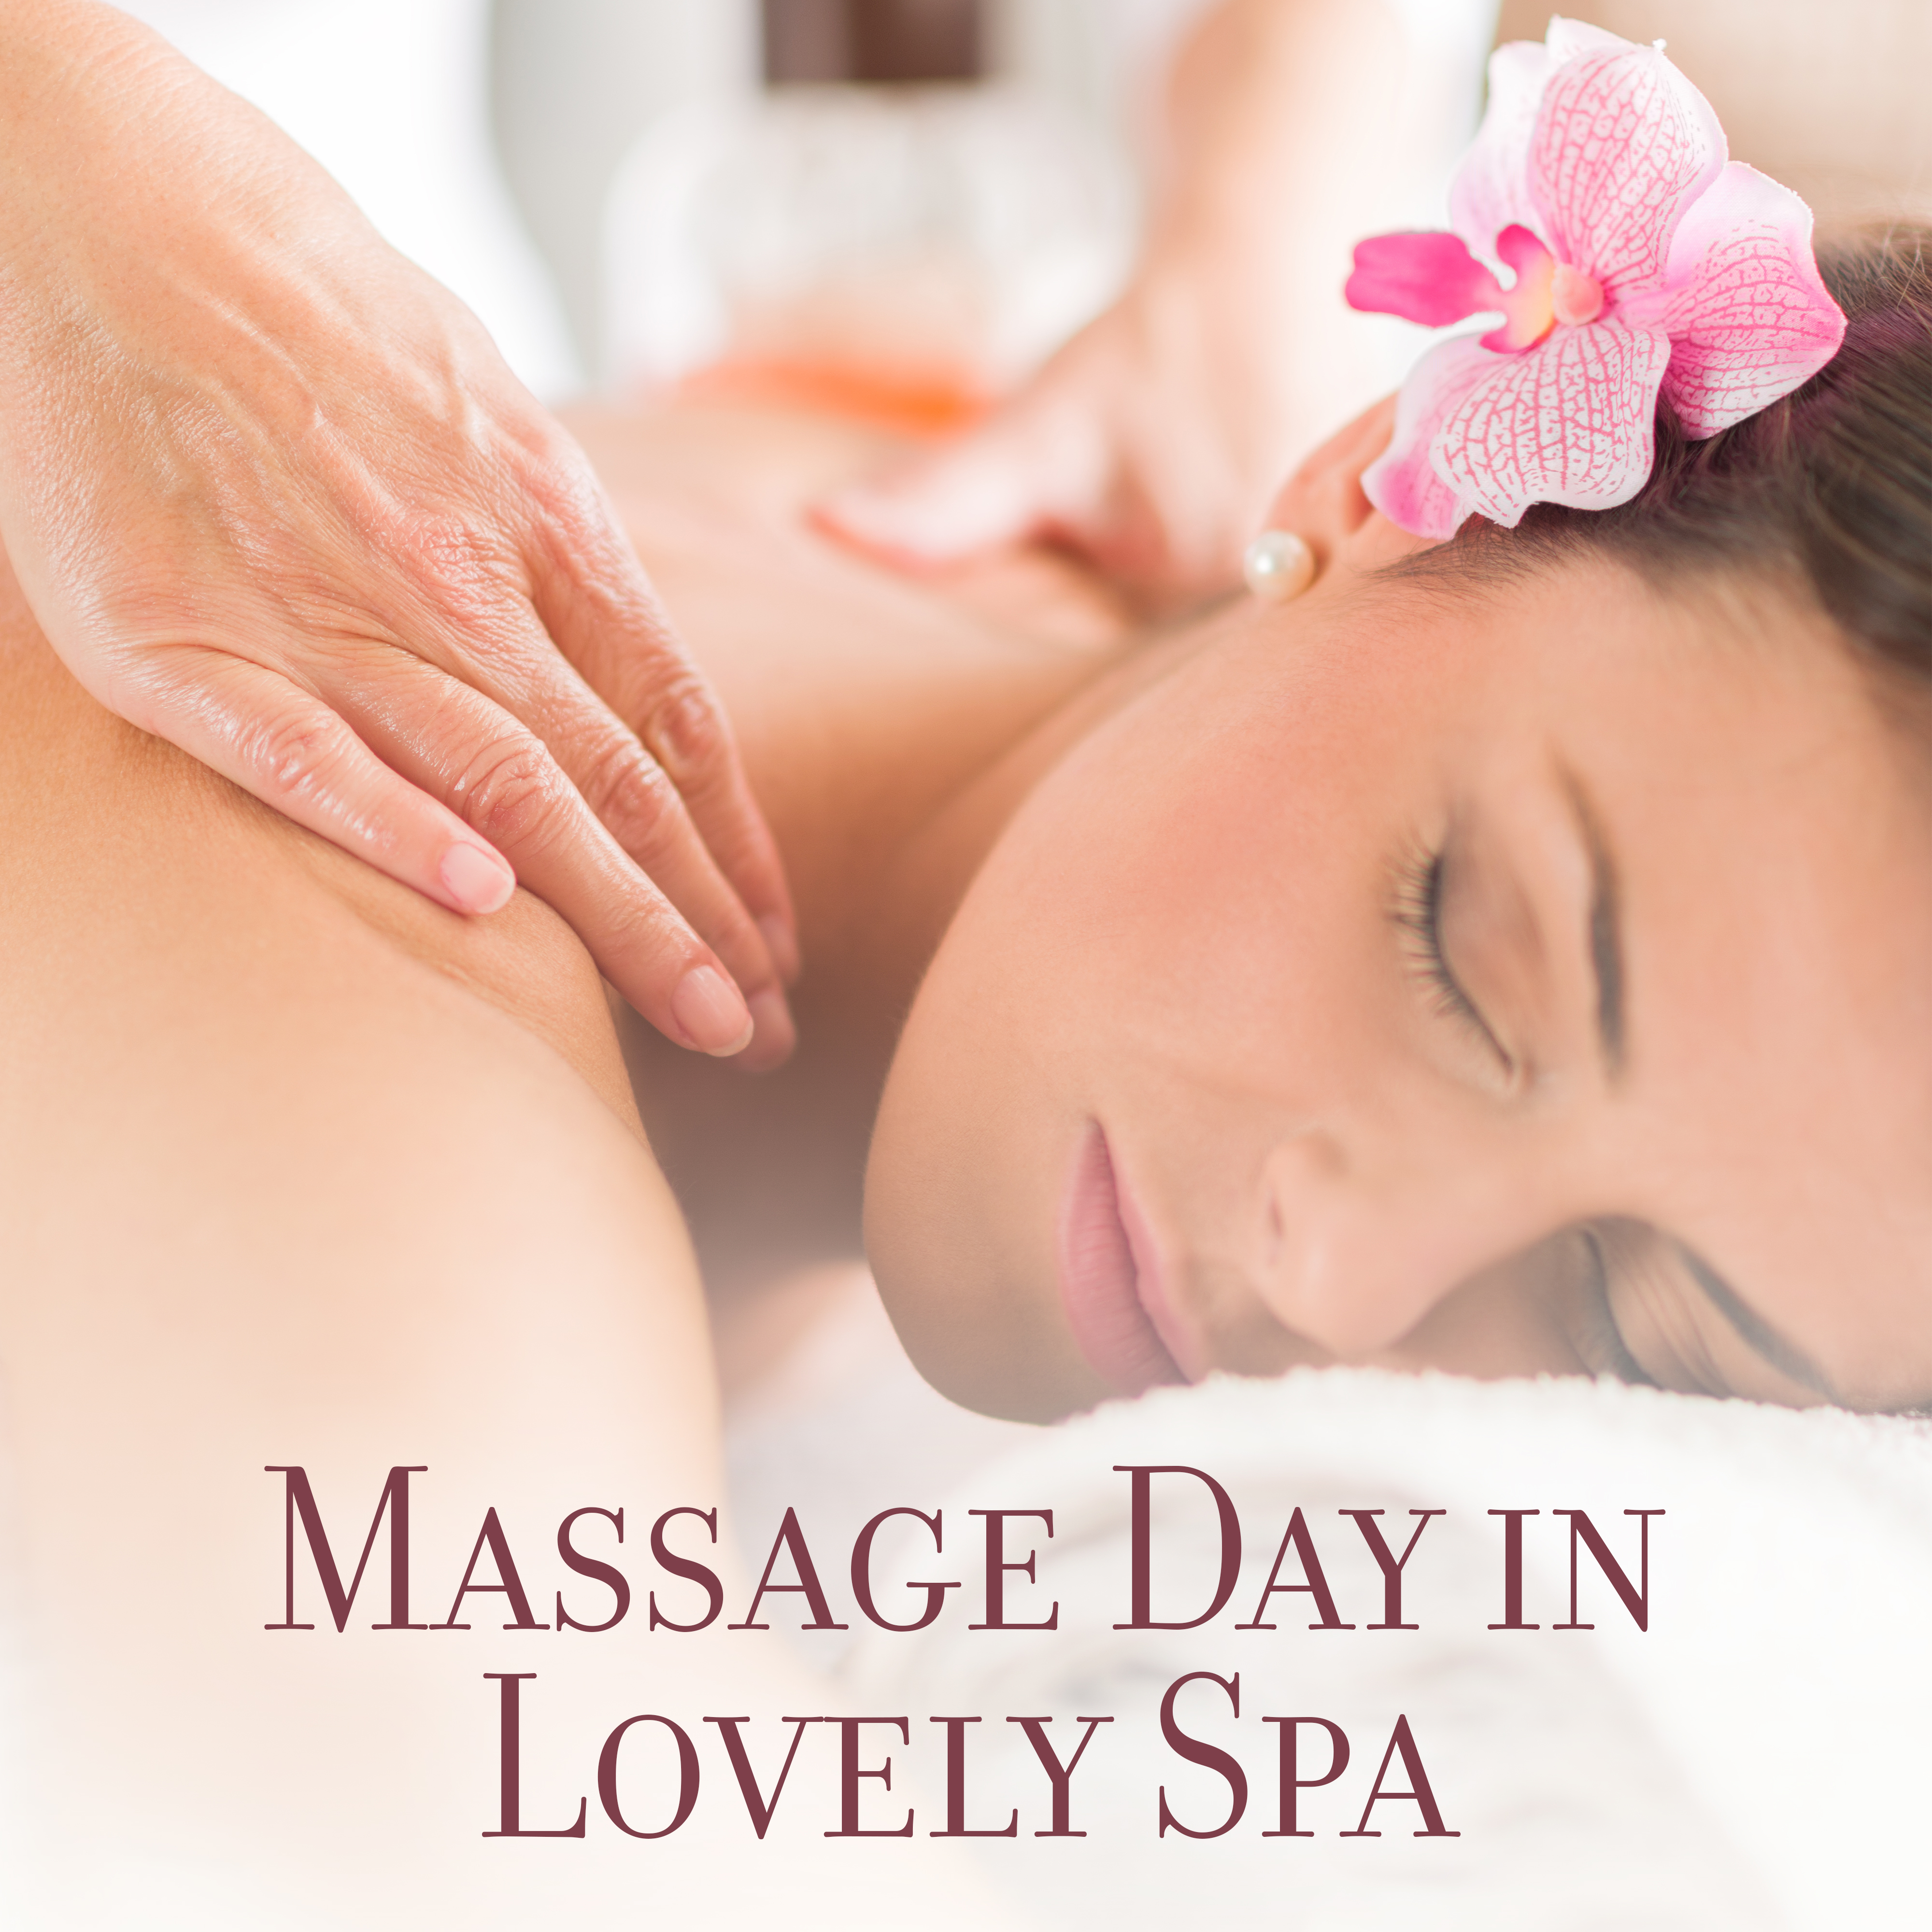 Massage Day in Lovely Spa  New Age Relaxing Spa  Wellness Music, Soft Atmosphere Sounds for Exotic Massage